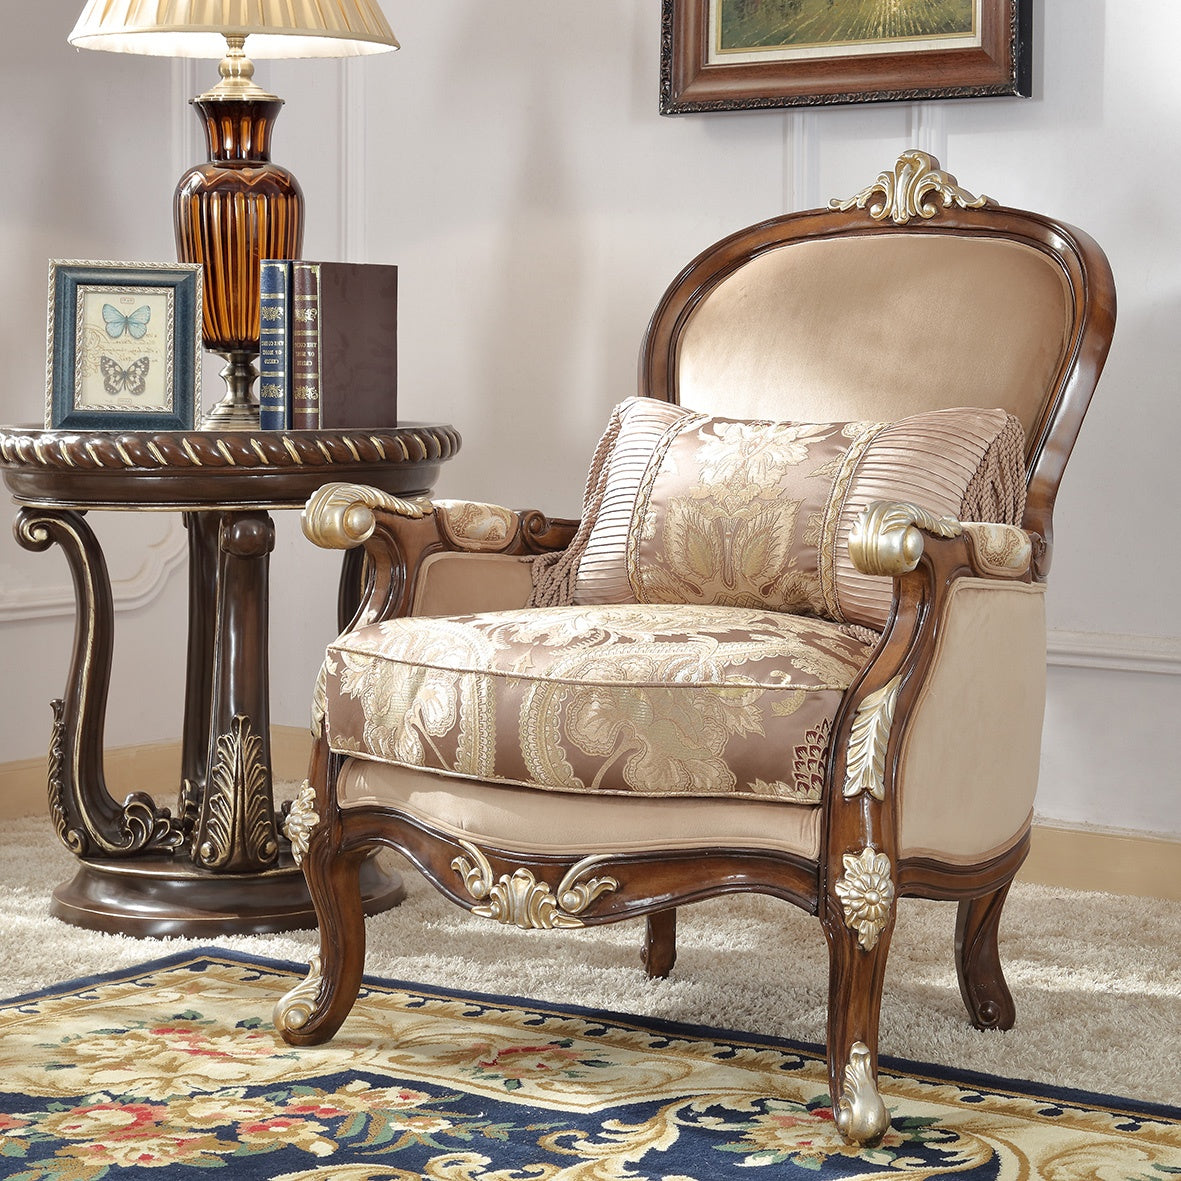 Fabric Accent Chair in Mahogany Finish European Traditional Victorian